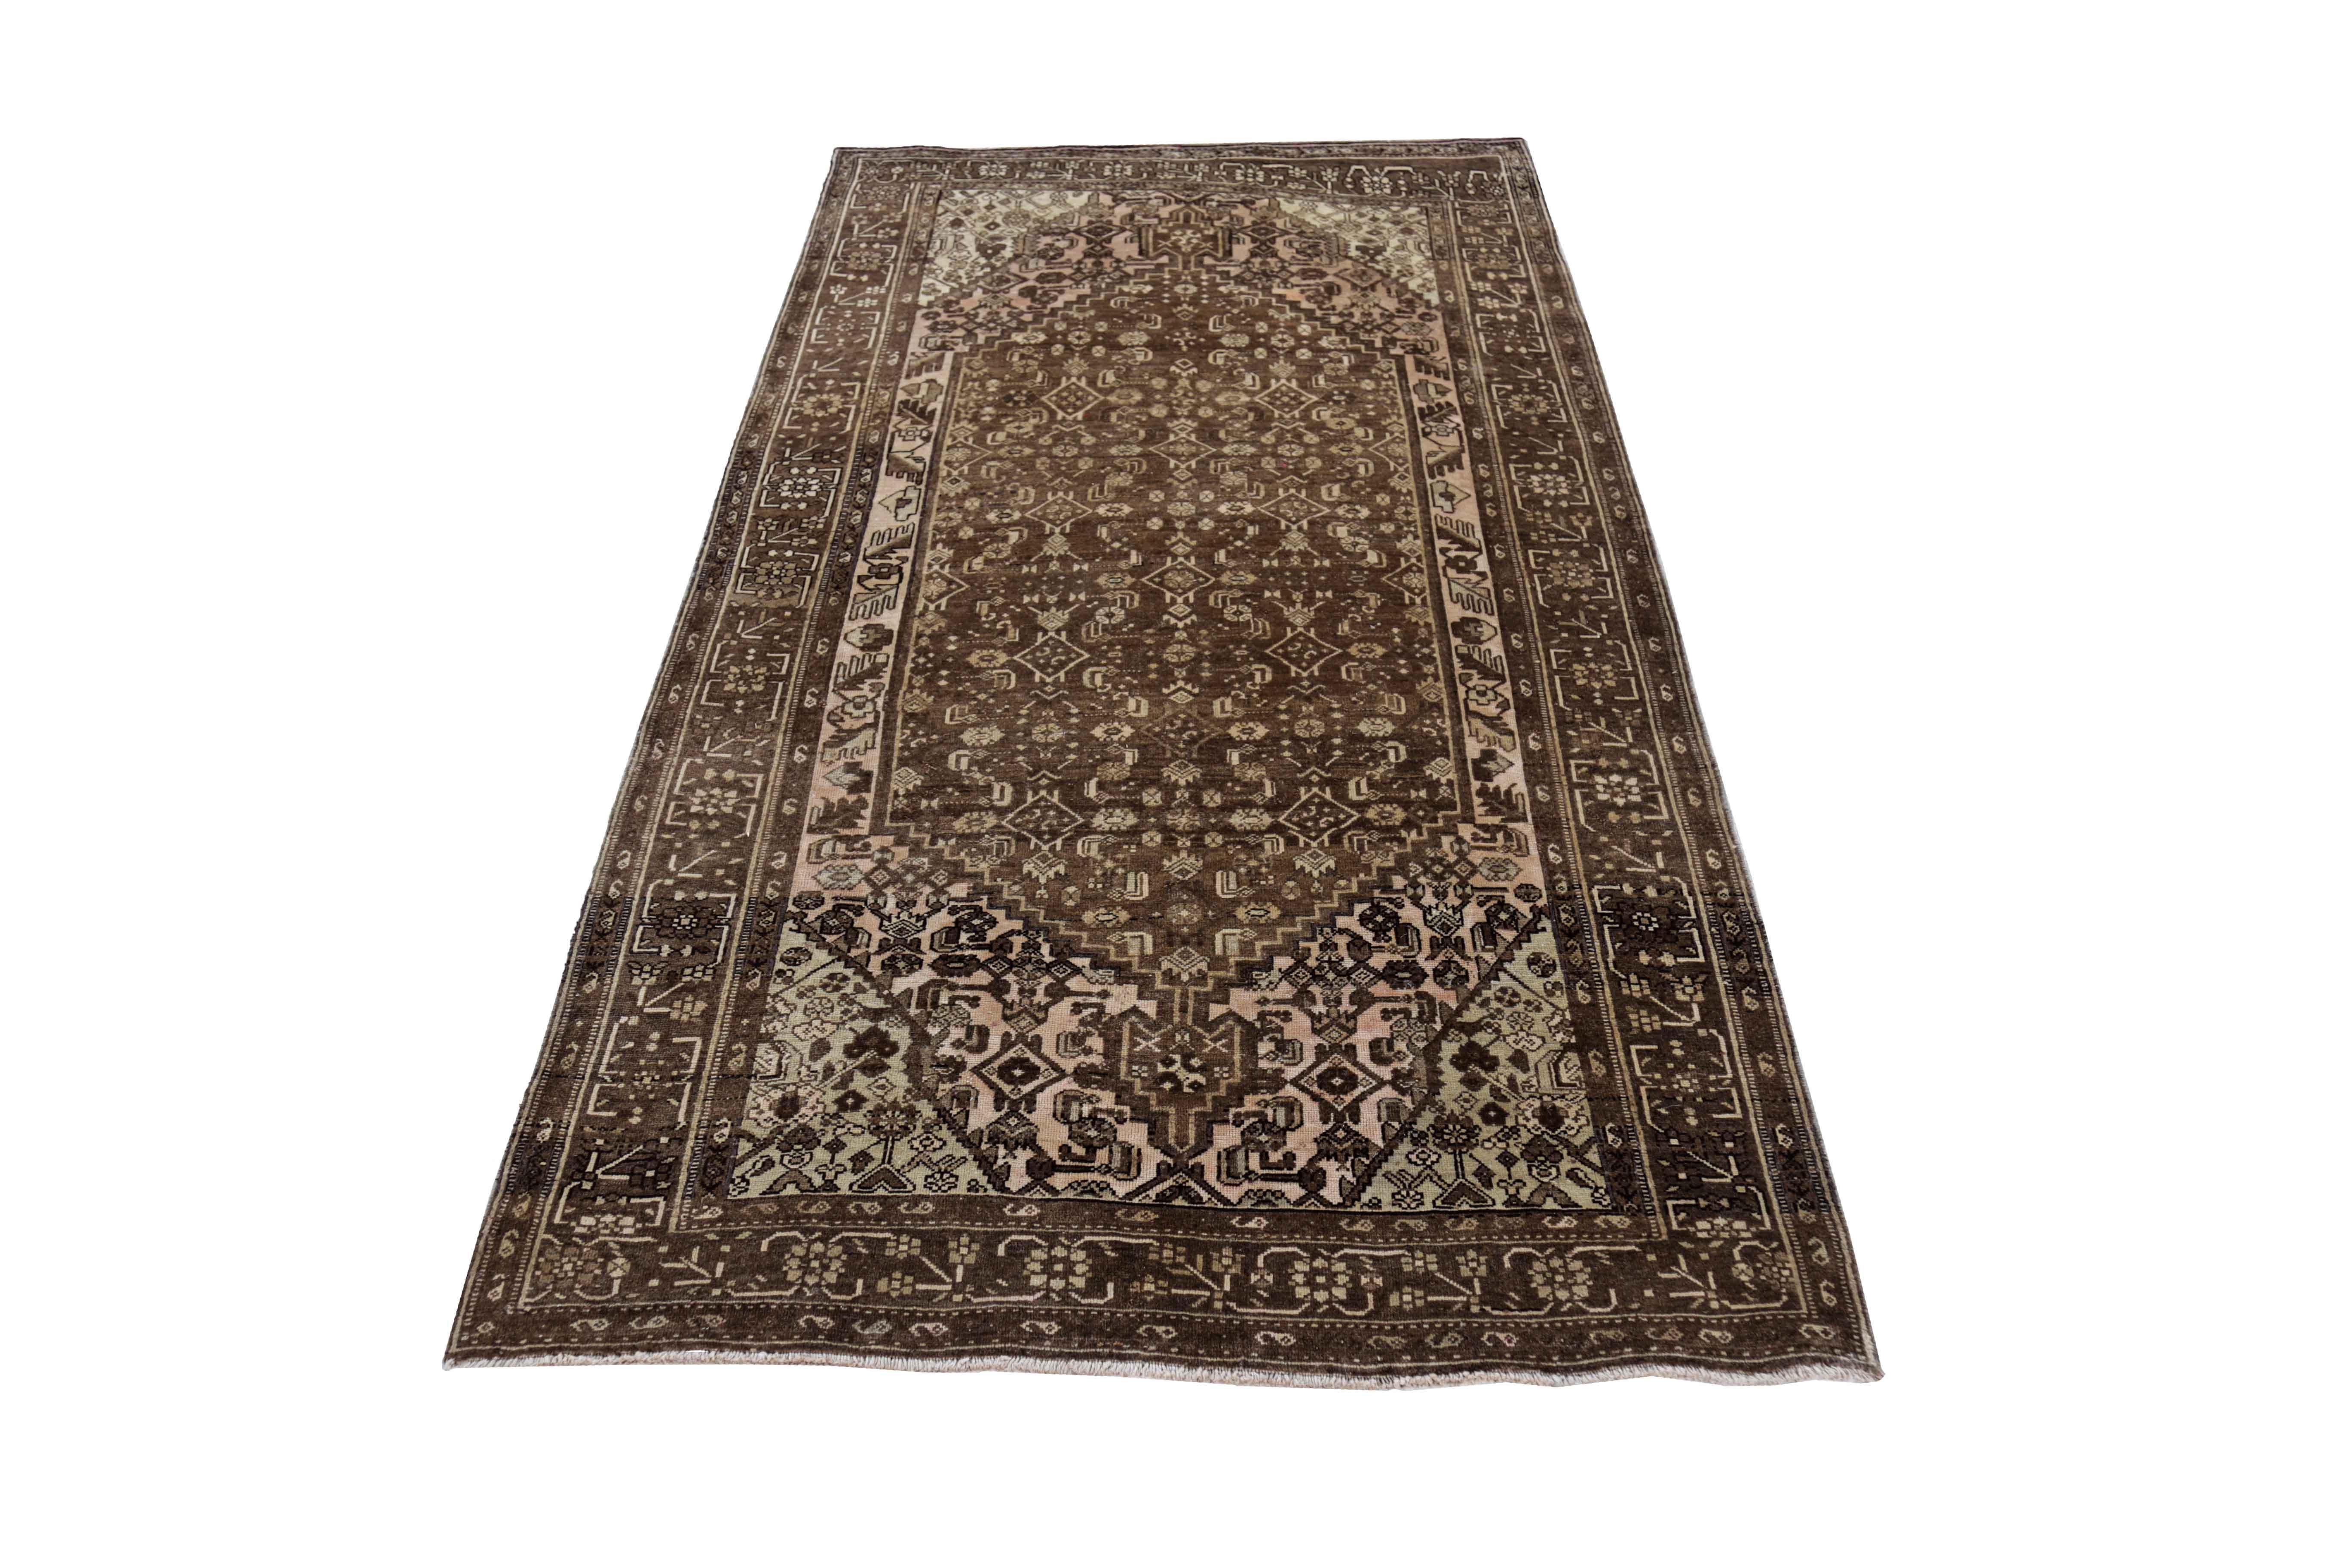 Antique Persian area rug handwoven from the finest sheep’s wool. It’s colored with all-natural vegetable dyes that are safe for humans and pets. It’s a traditional Bijar design handwoven by expert artisans. It’s a lovely area rug that can be